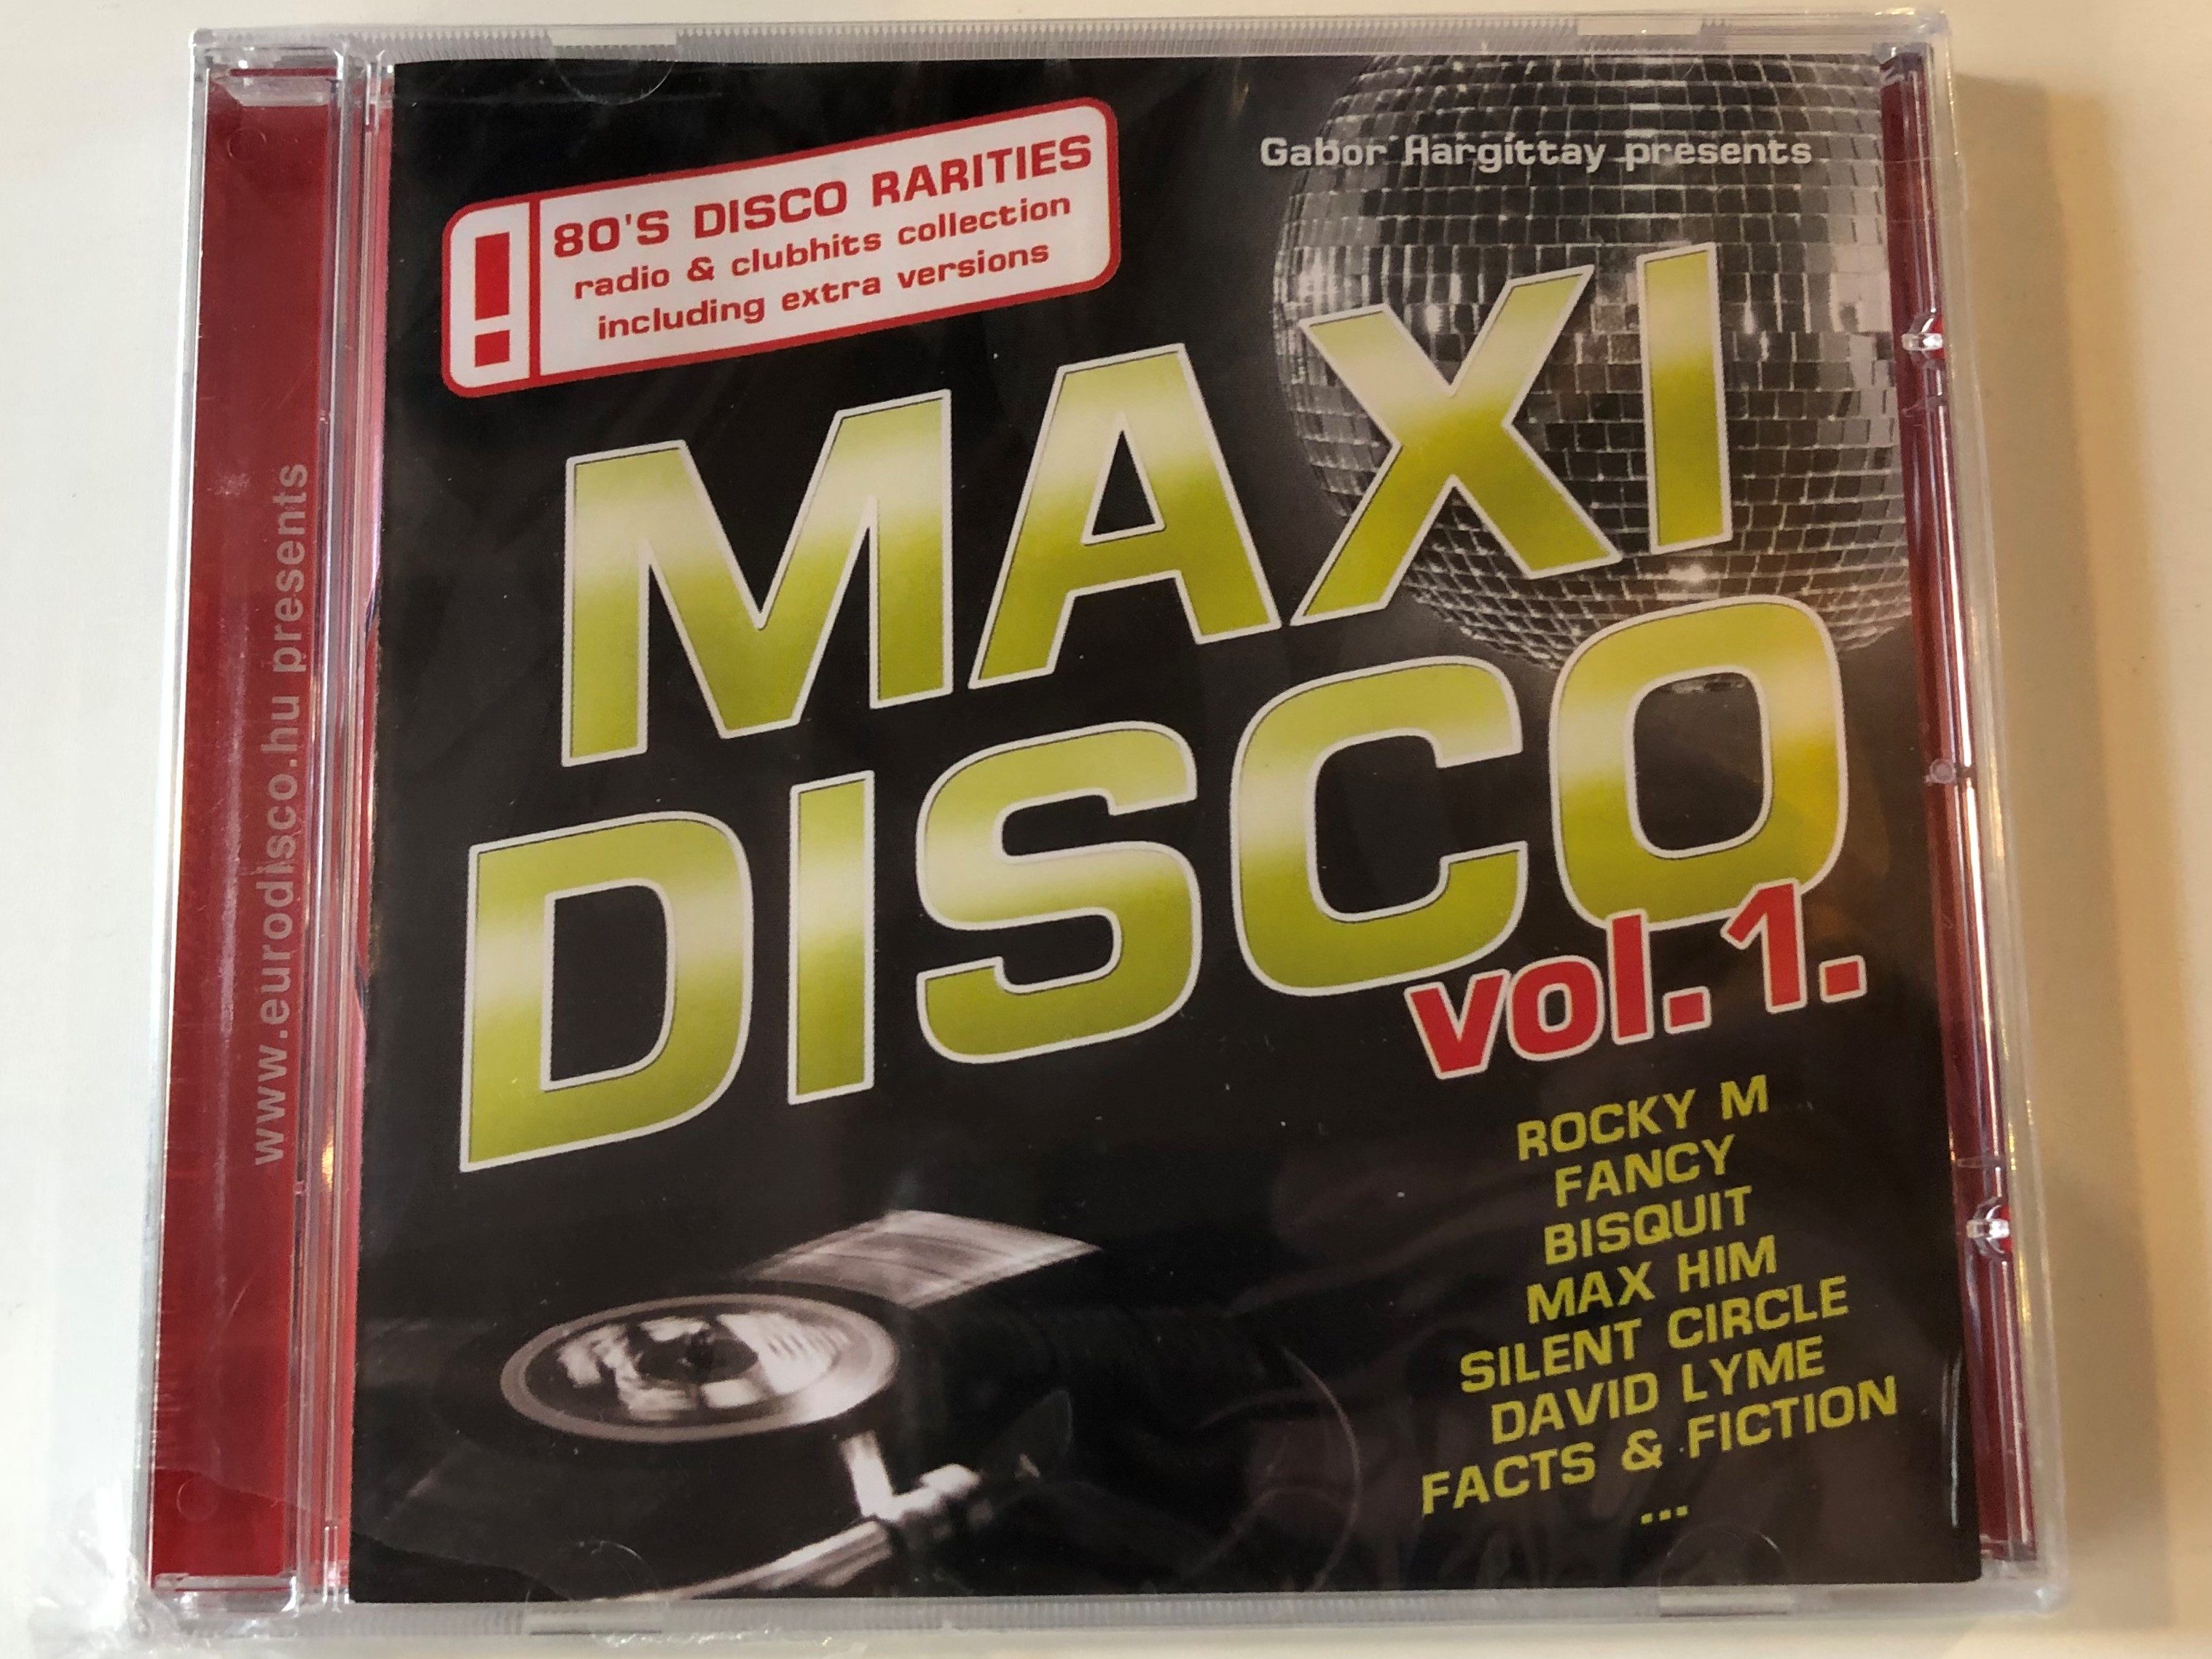 gabor-hargittay-presents-maxi-disco-vol.-1.-rocky-m-fancy-bisquit-max-him-silent-circle-david-lyme-facts-fiction...-80-s-disco-rarities-radio-clubhits-collection-incl.-extra-versions-1-.jpg